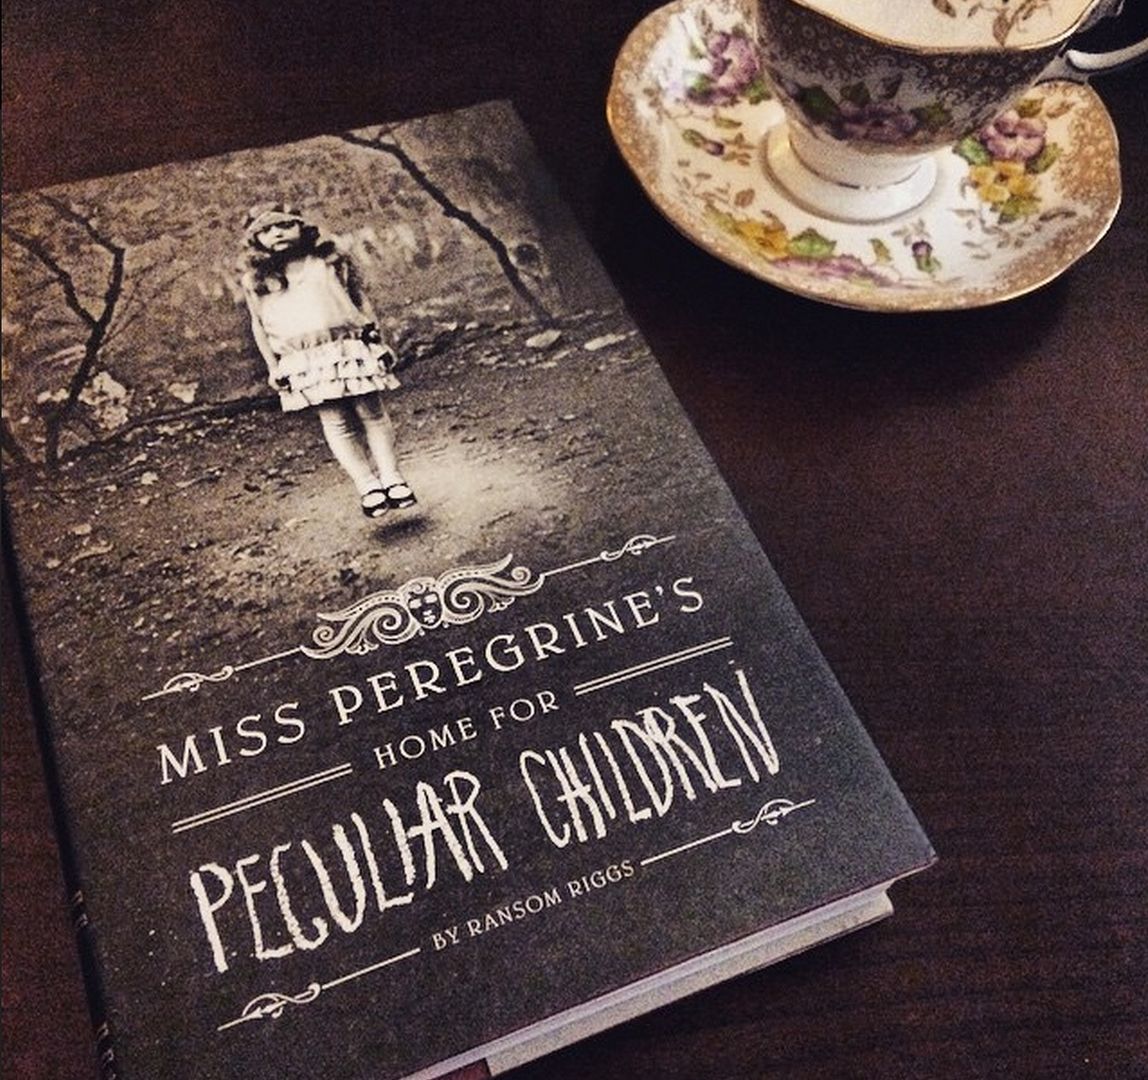 Miss Peregrine's HOme for Peculiar Children: One of the YA books from the Uppercase Box subscription